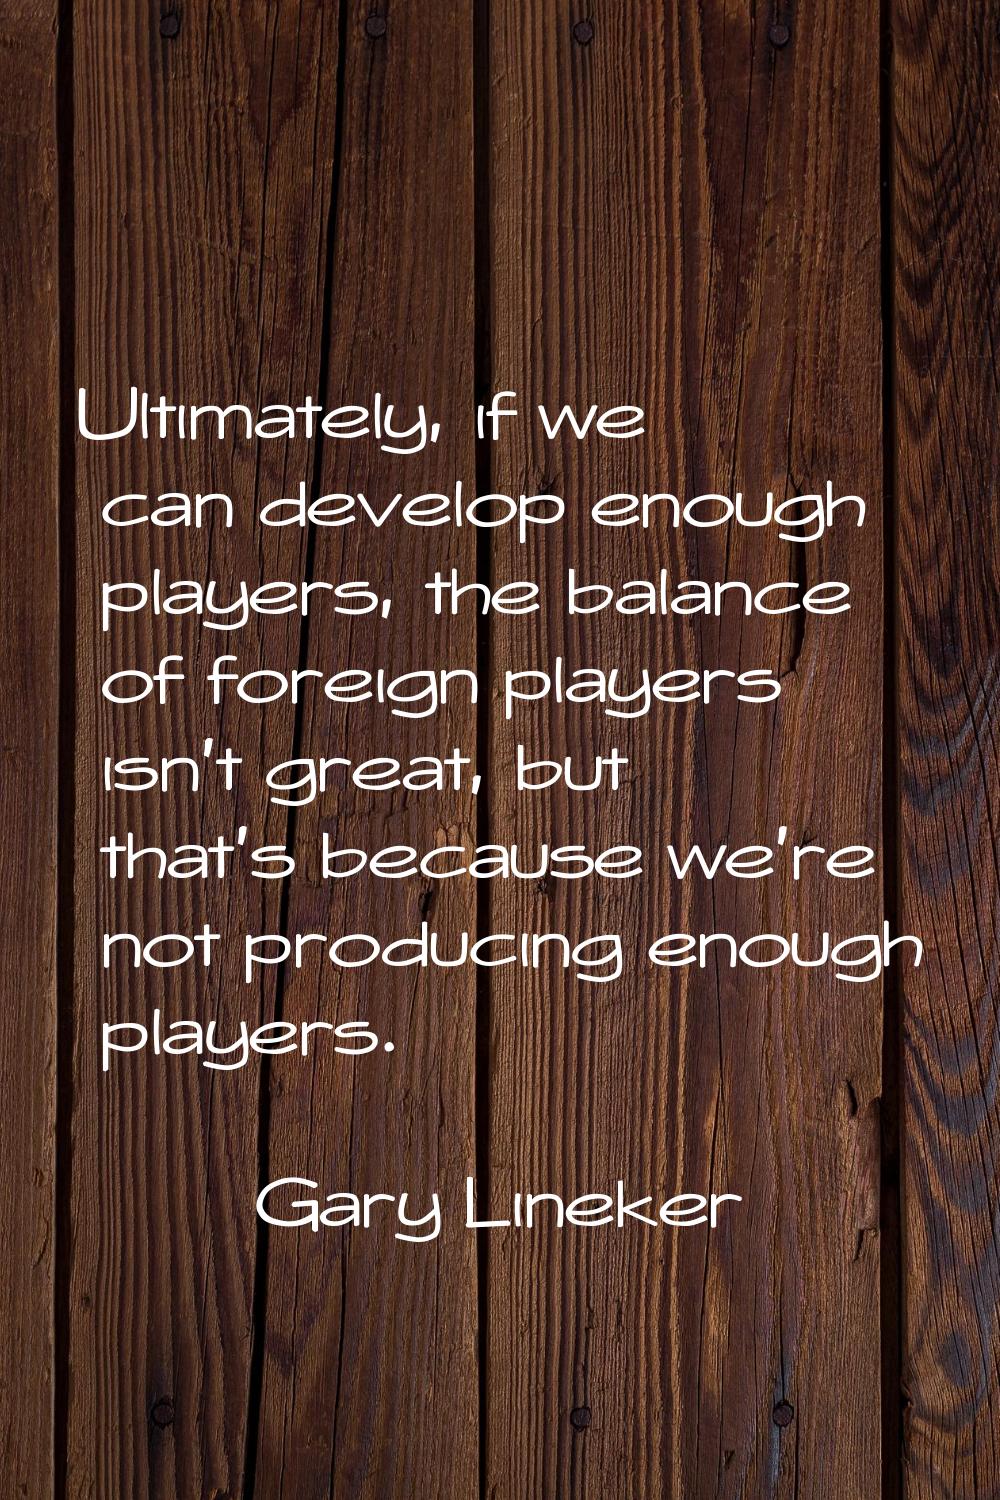 Ultimately, if we can develop enough players, the balance of foreign players isn't great, but that'